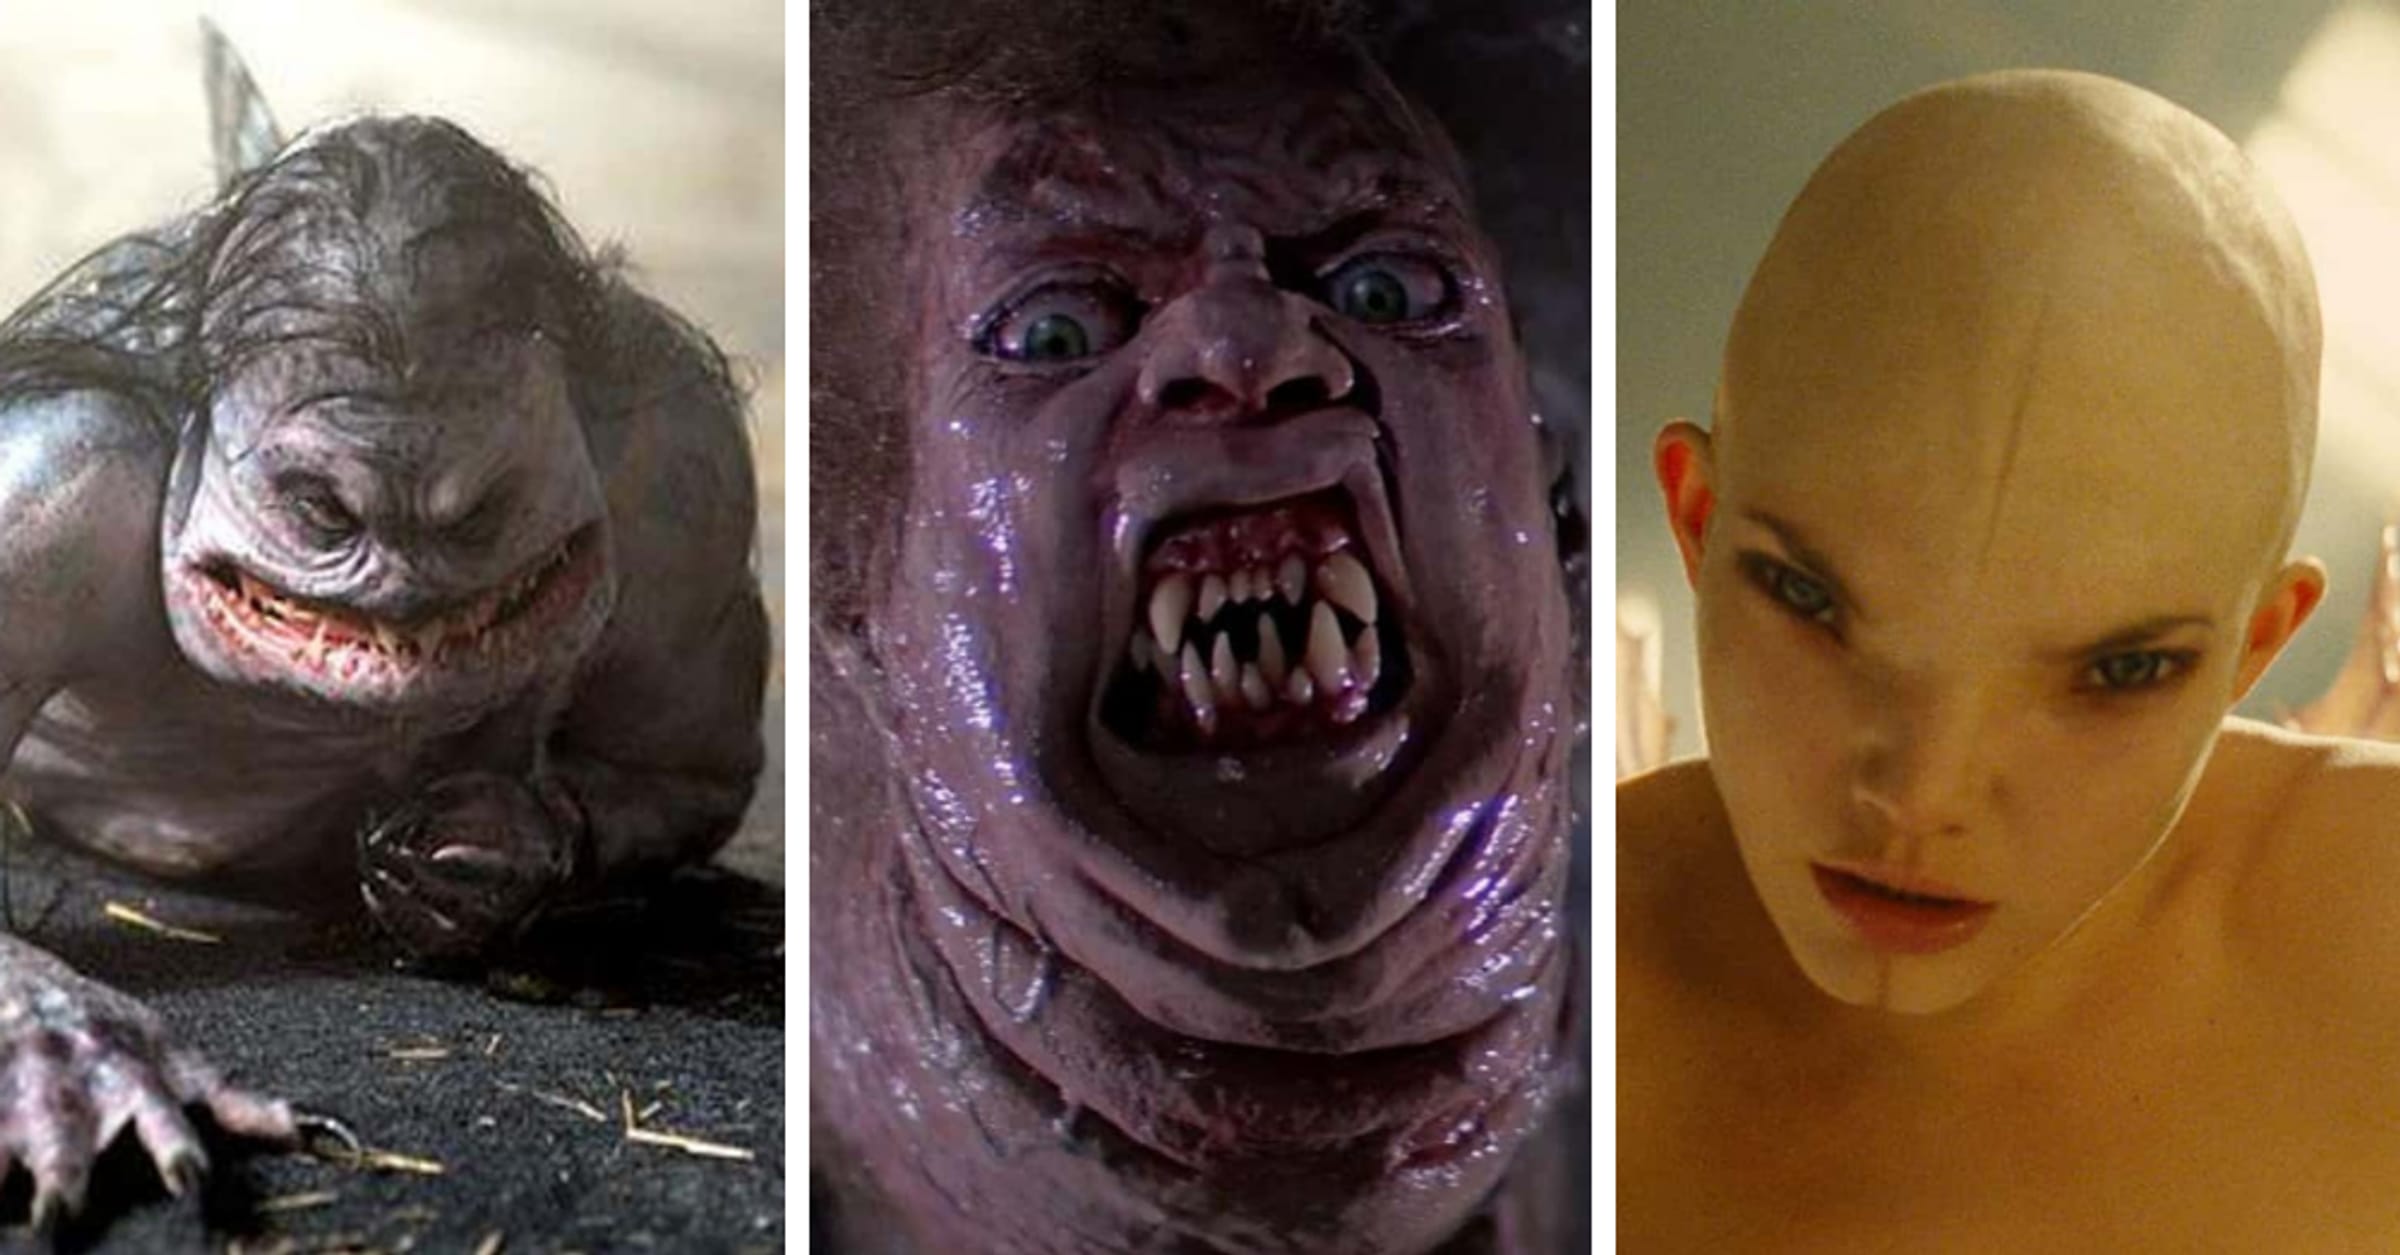 Ten sci-fi movie monsters that could destroy humanity